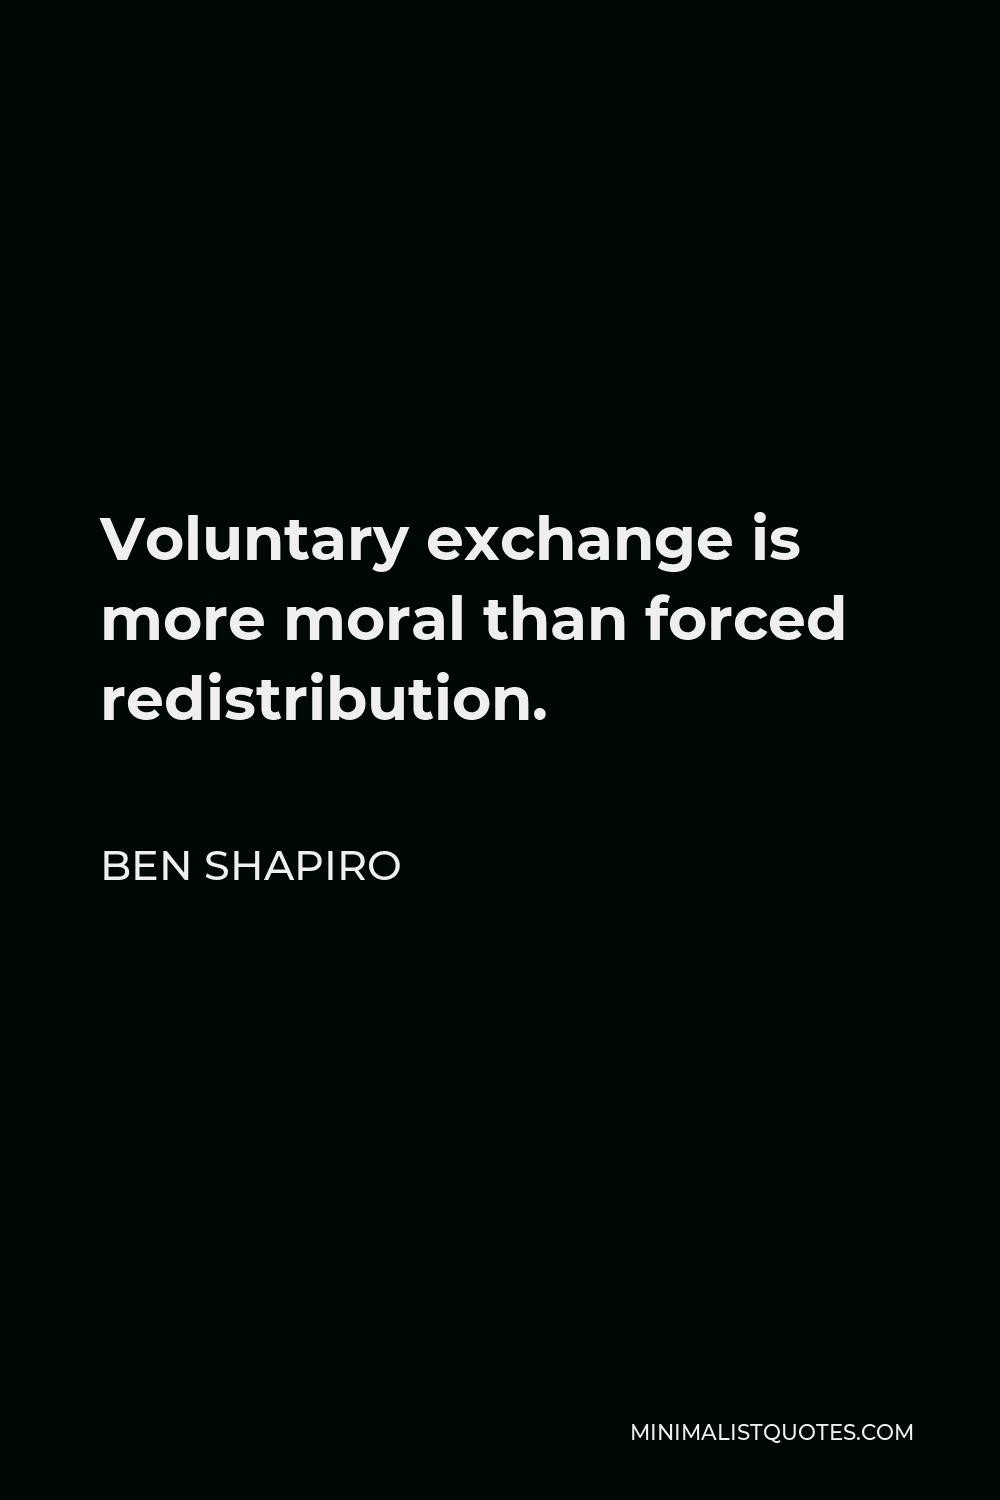 Ben Shapiro Quote - Voluntary exchange is more moral than forced redistribution.